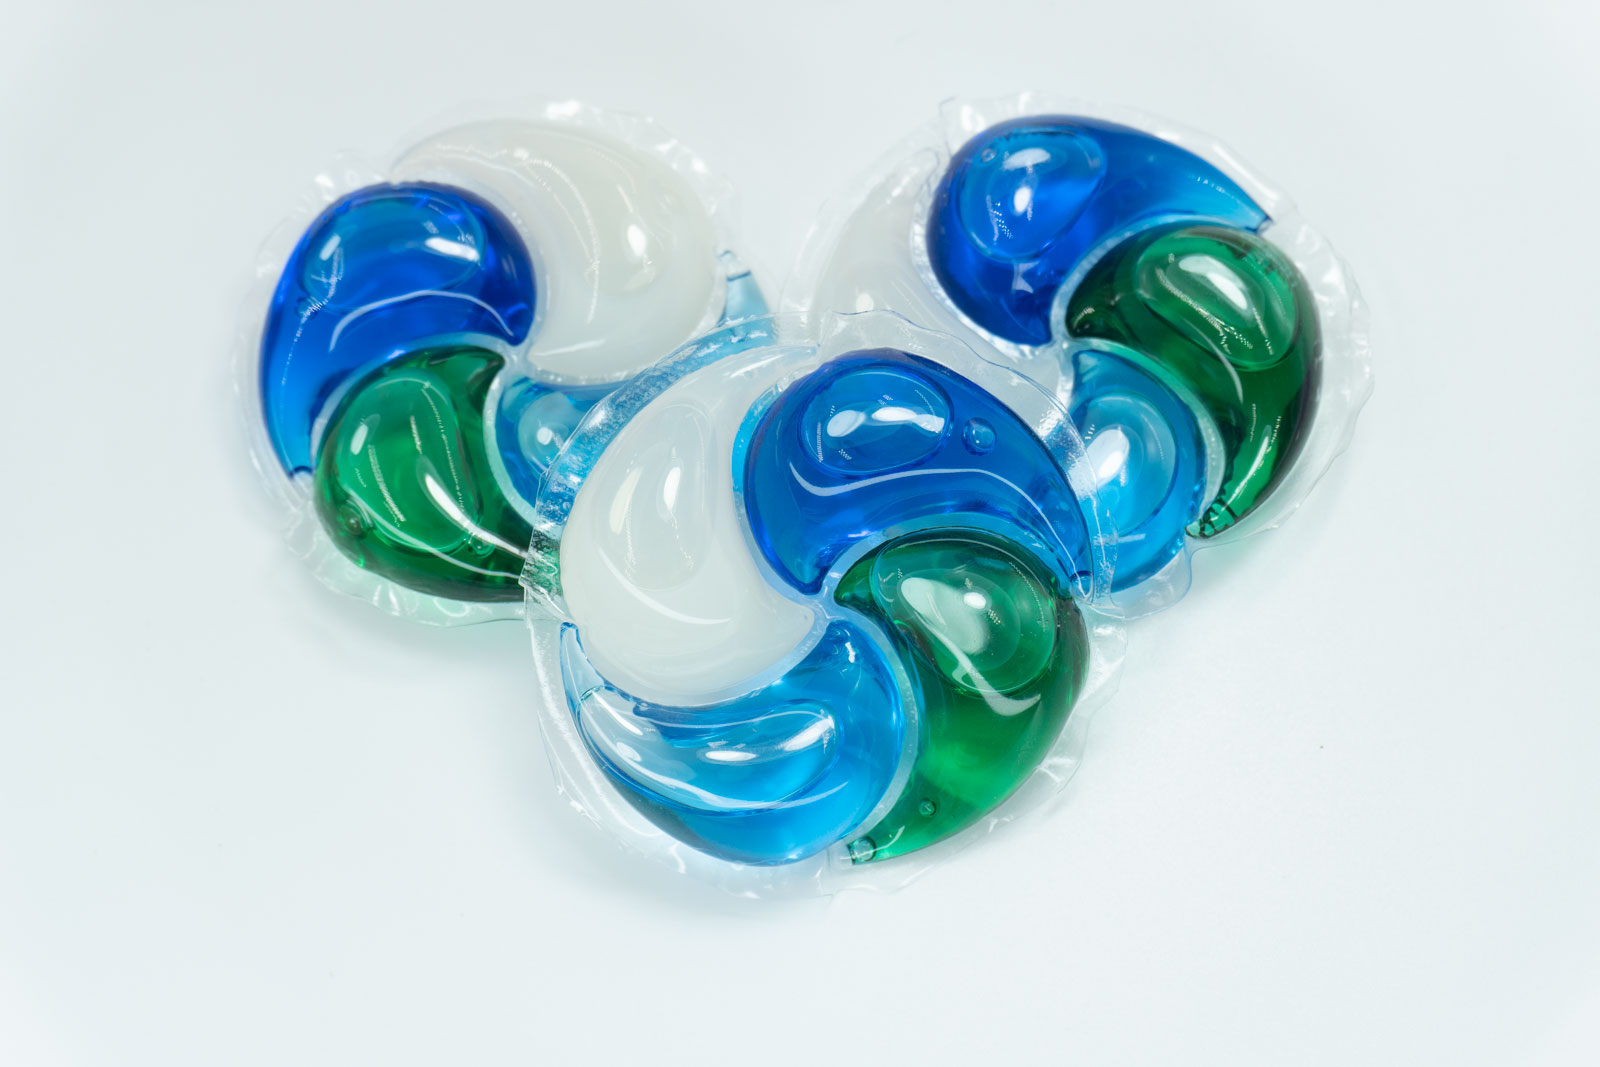 4 chamber laundry pods with a round shape design